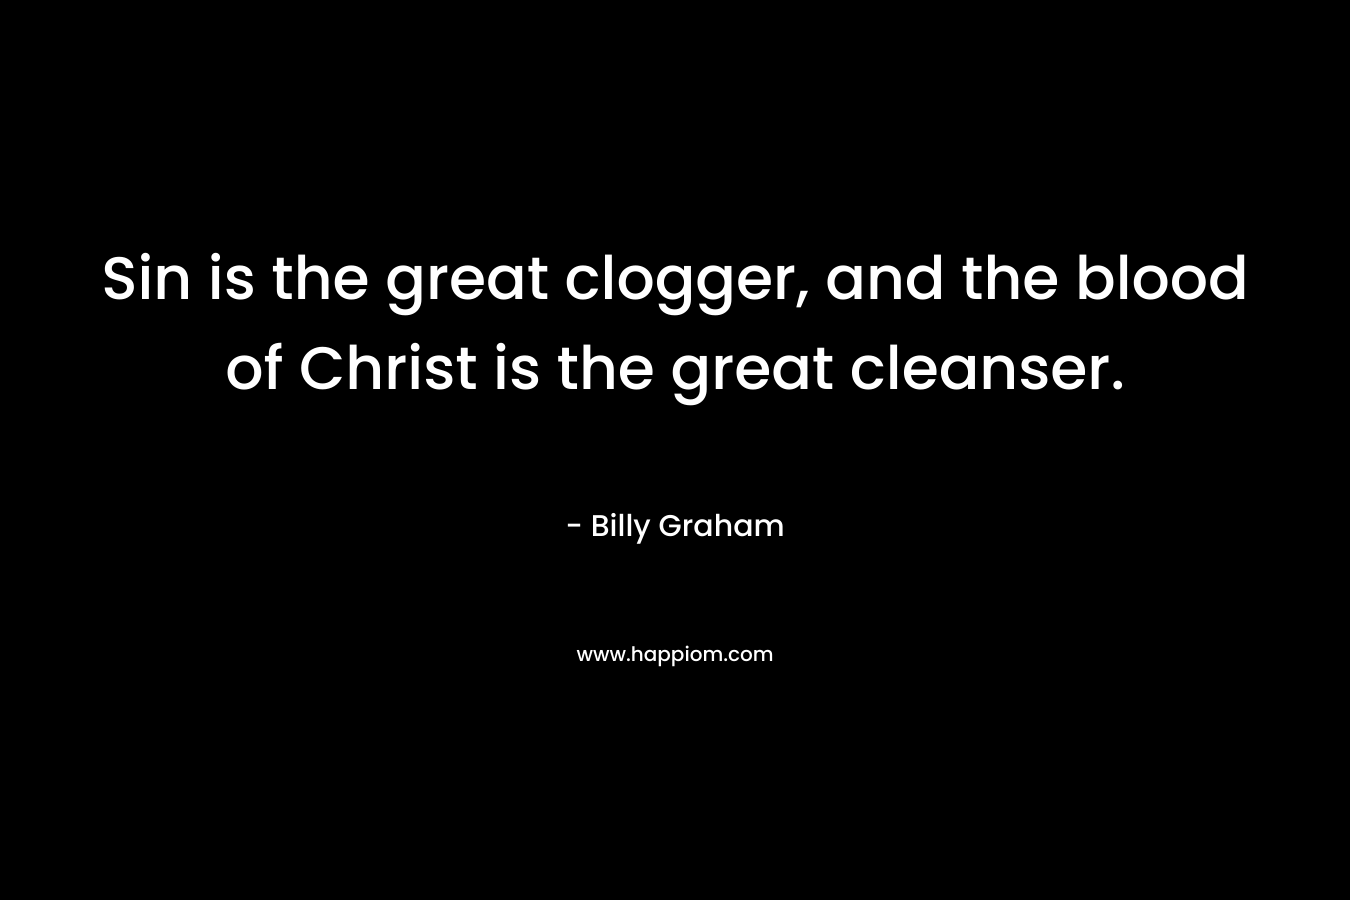 Sin is the great clogger, and the blood of Christ is the great cleanser. – Billy Graham